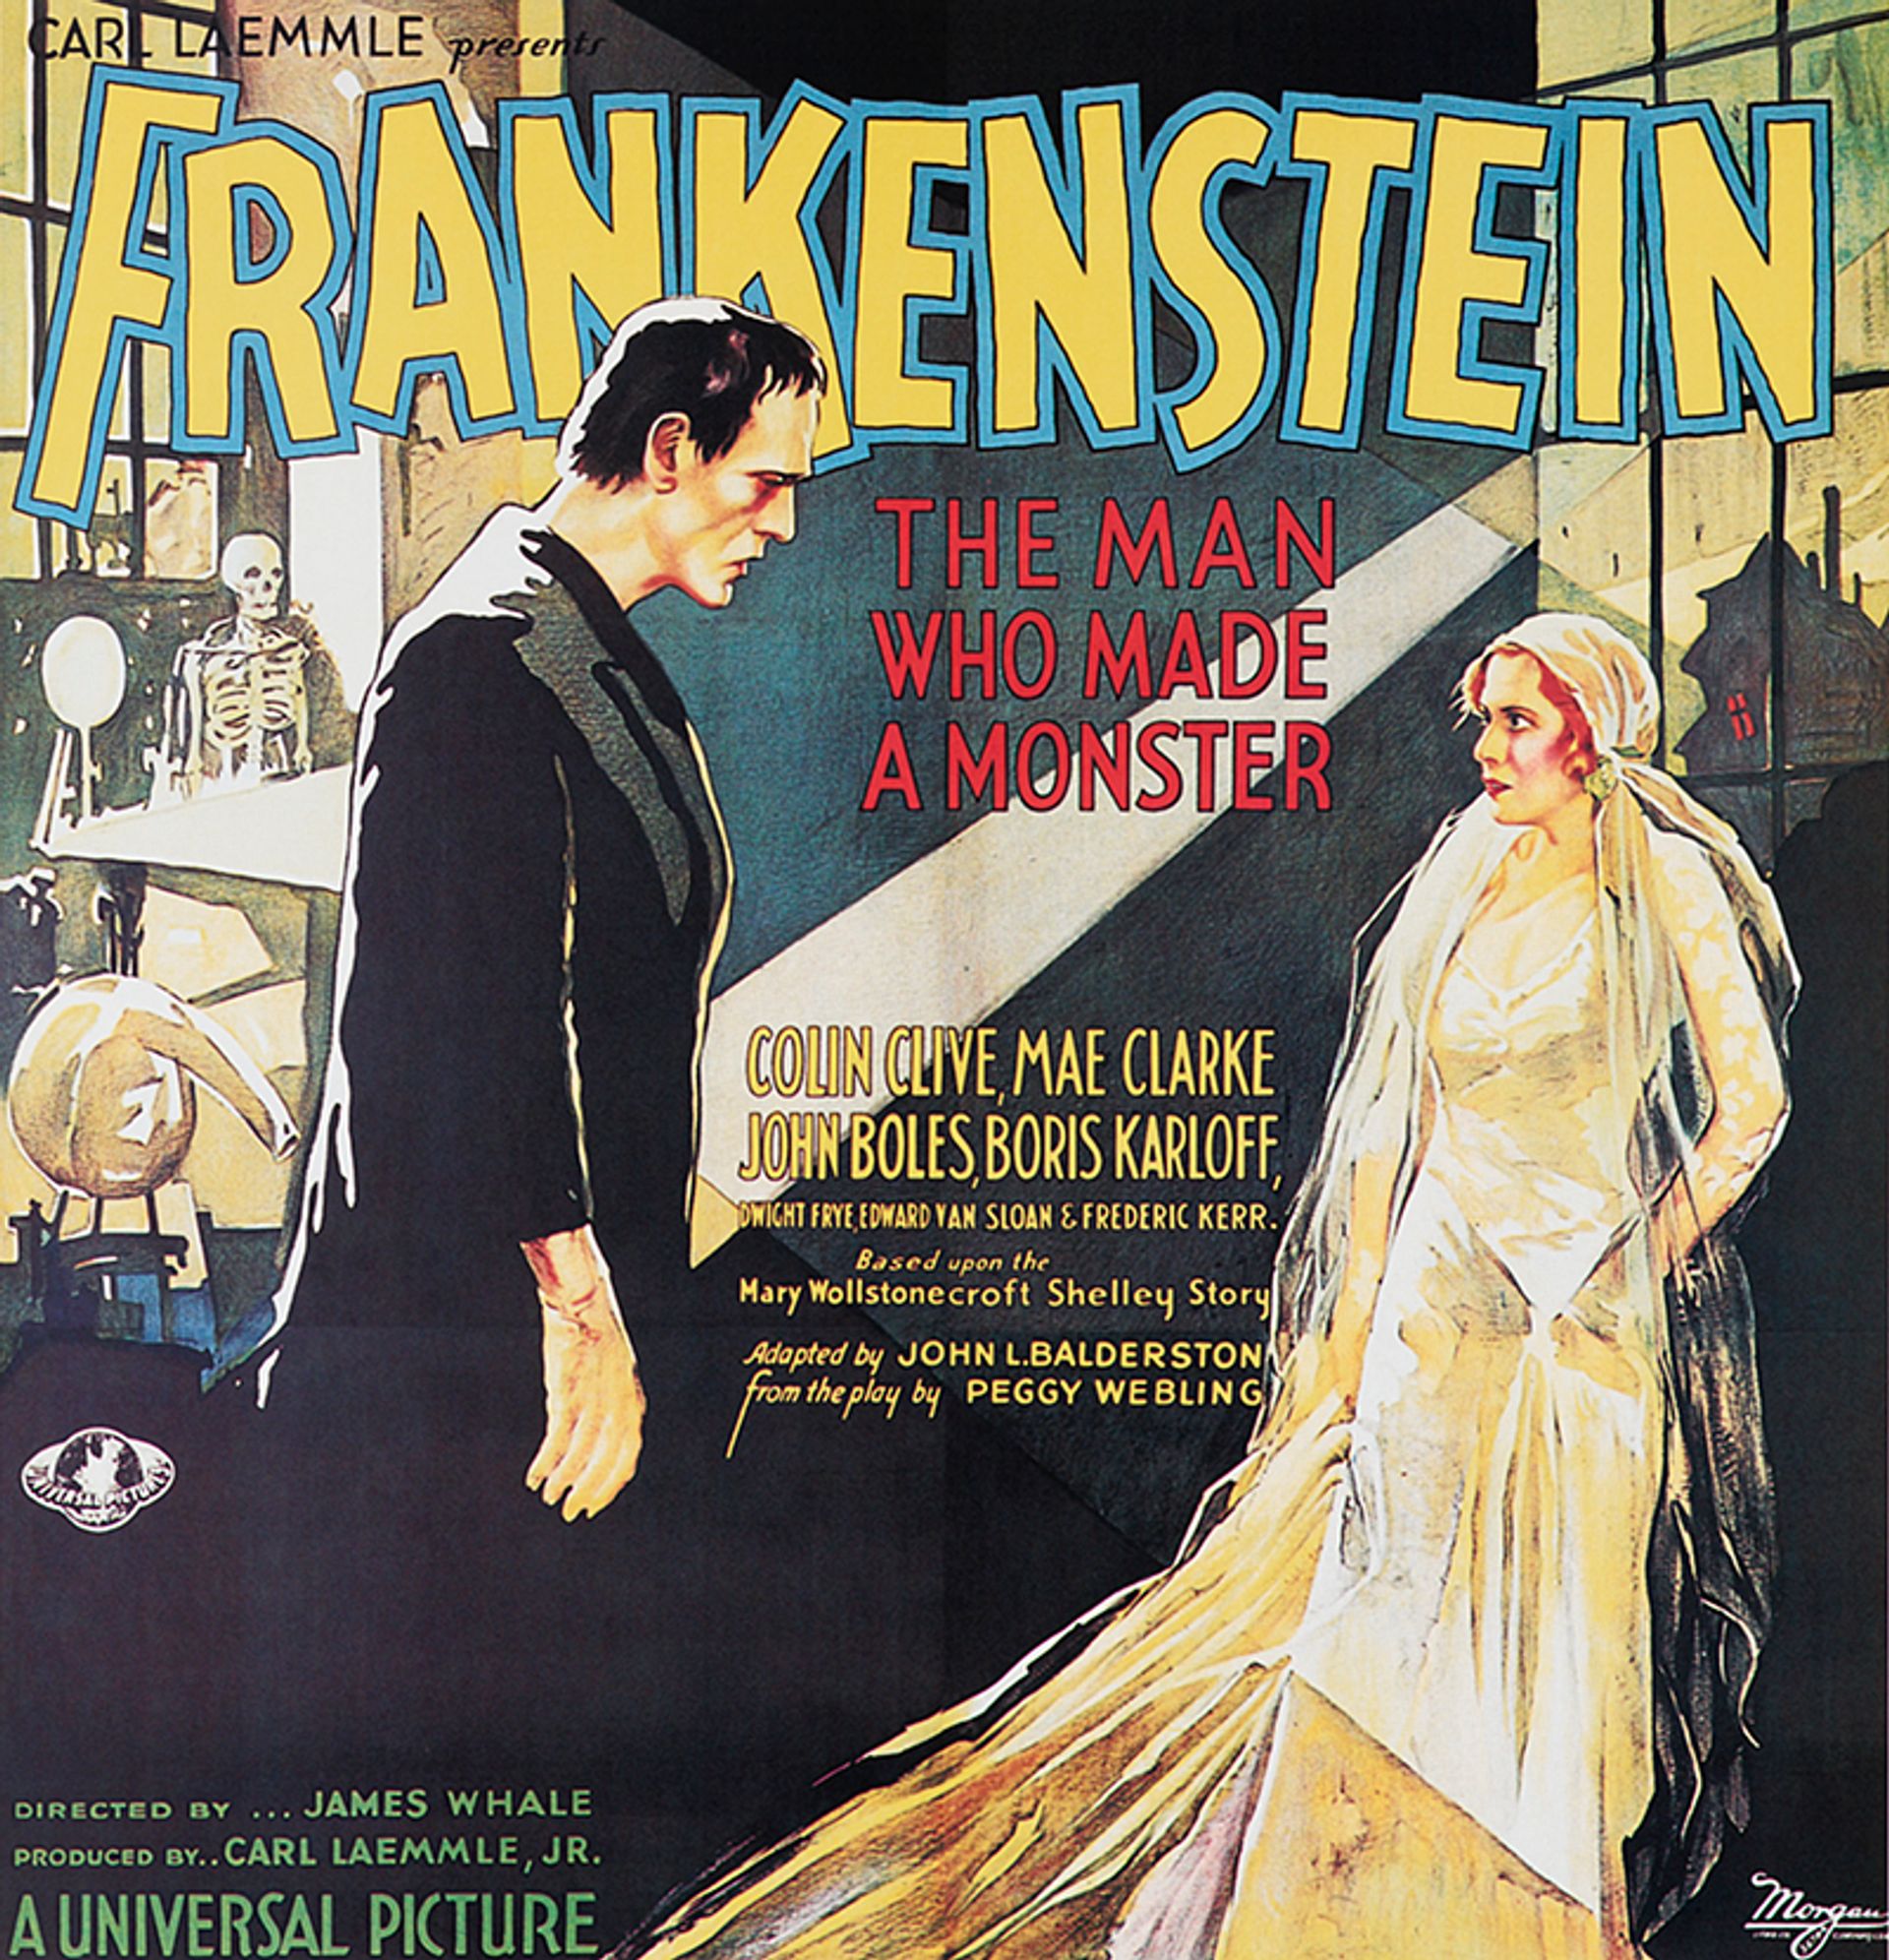 Film poster for Carl Laemmle Presents Frankenstein: the Man who Made a Monster (1931) from the collection of Stephen Fishler Photo:  © 1931 Universal Pictures Company, Inc.; courtesy of Universal Studios Licensing LLC